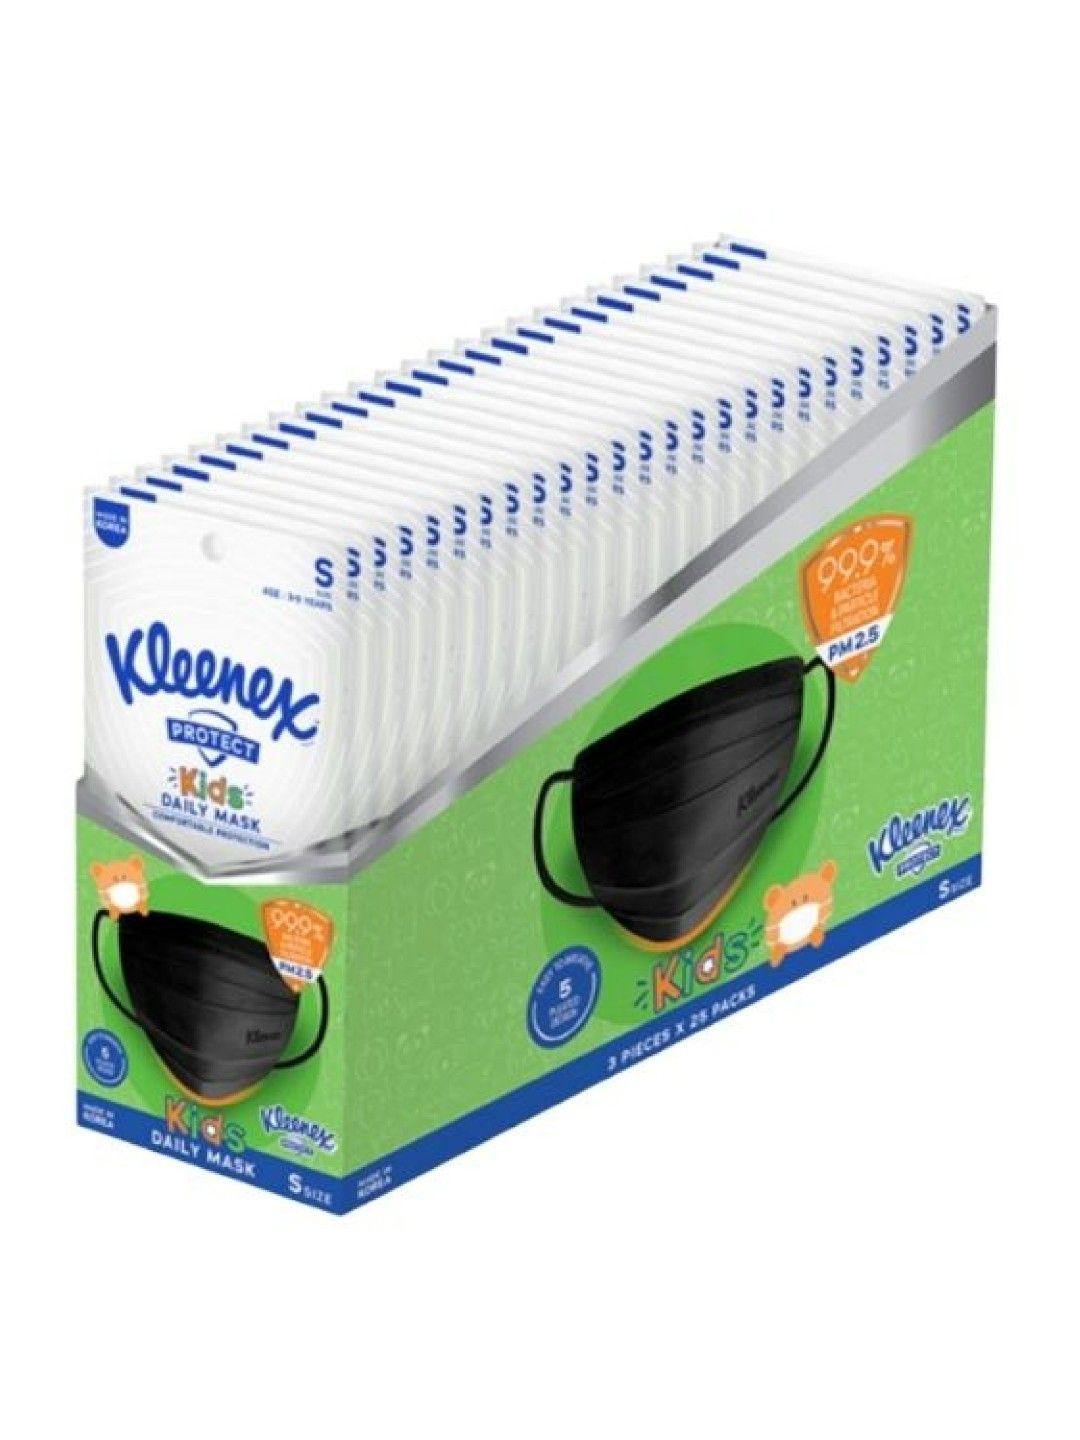 Kleenex Protect Kids Daily Face Mask Small 25-Pack (75 masks)